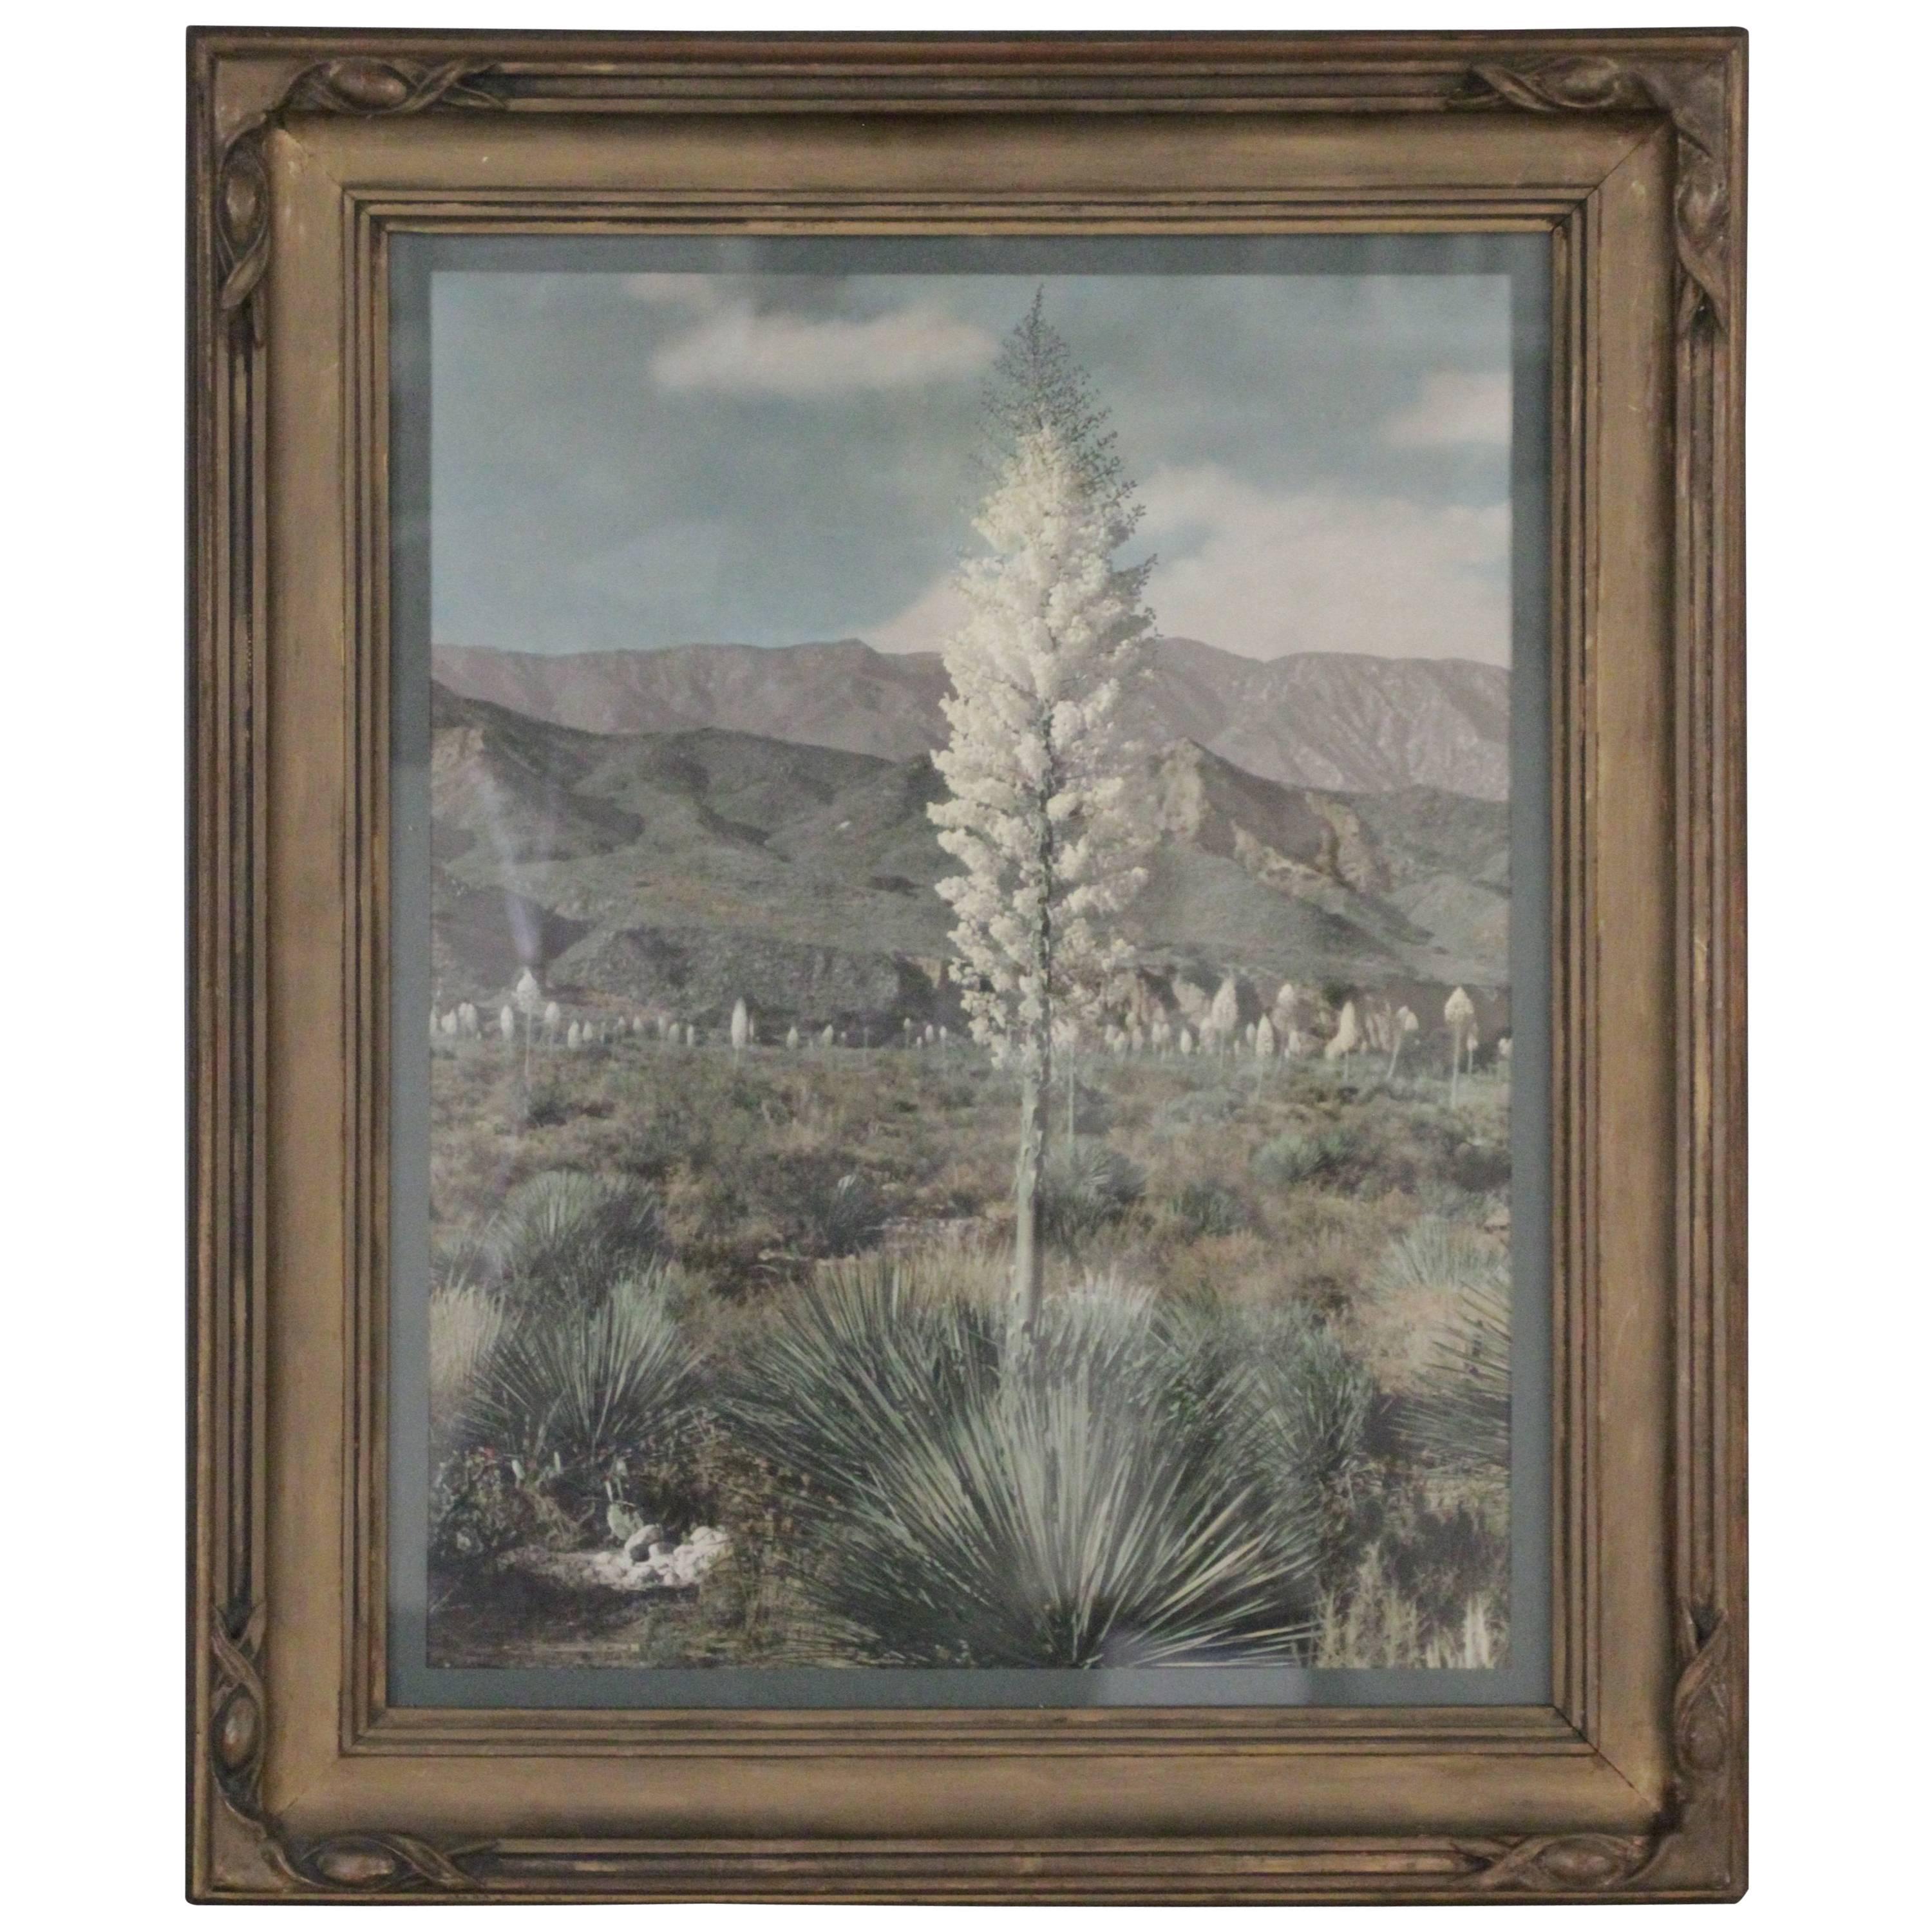 1920s Large-Scale Hand Tinted Photograph of the Desert and Yucca